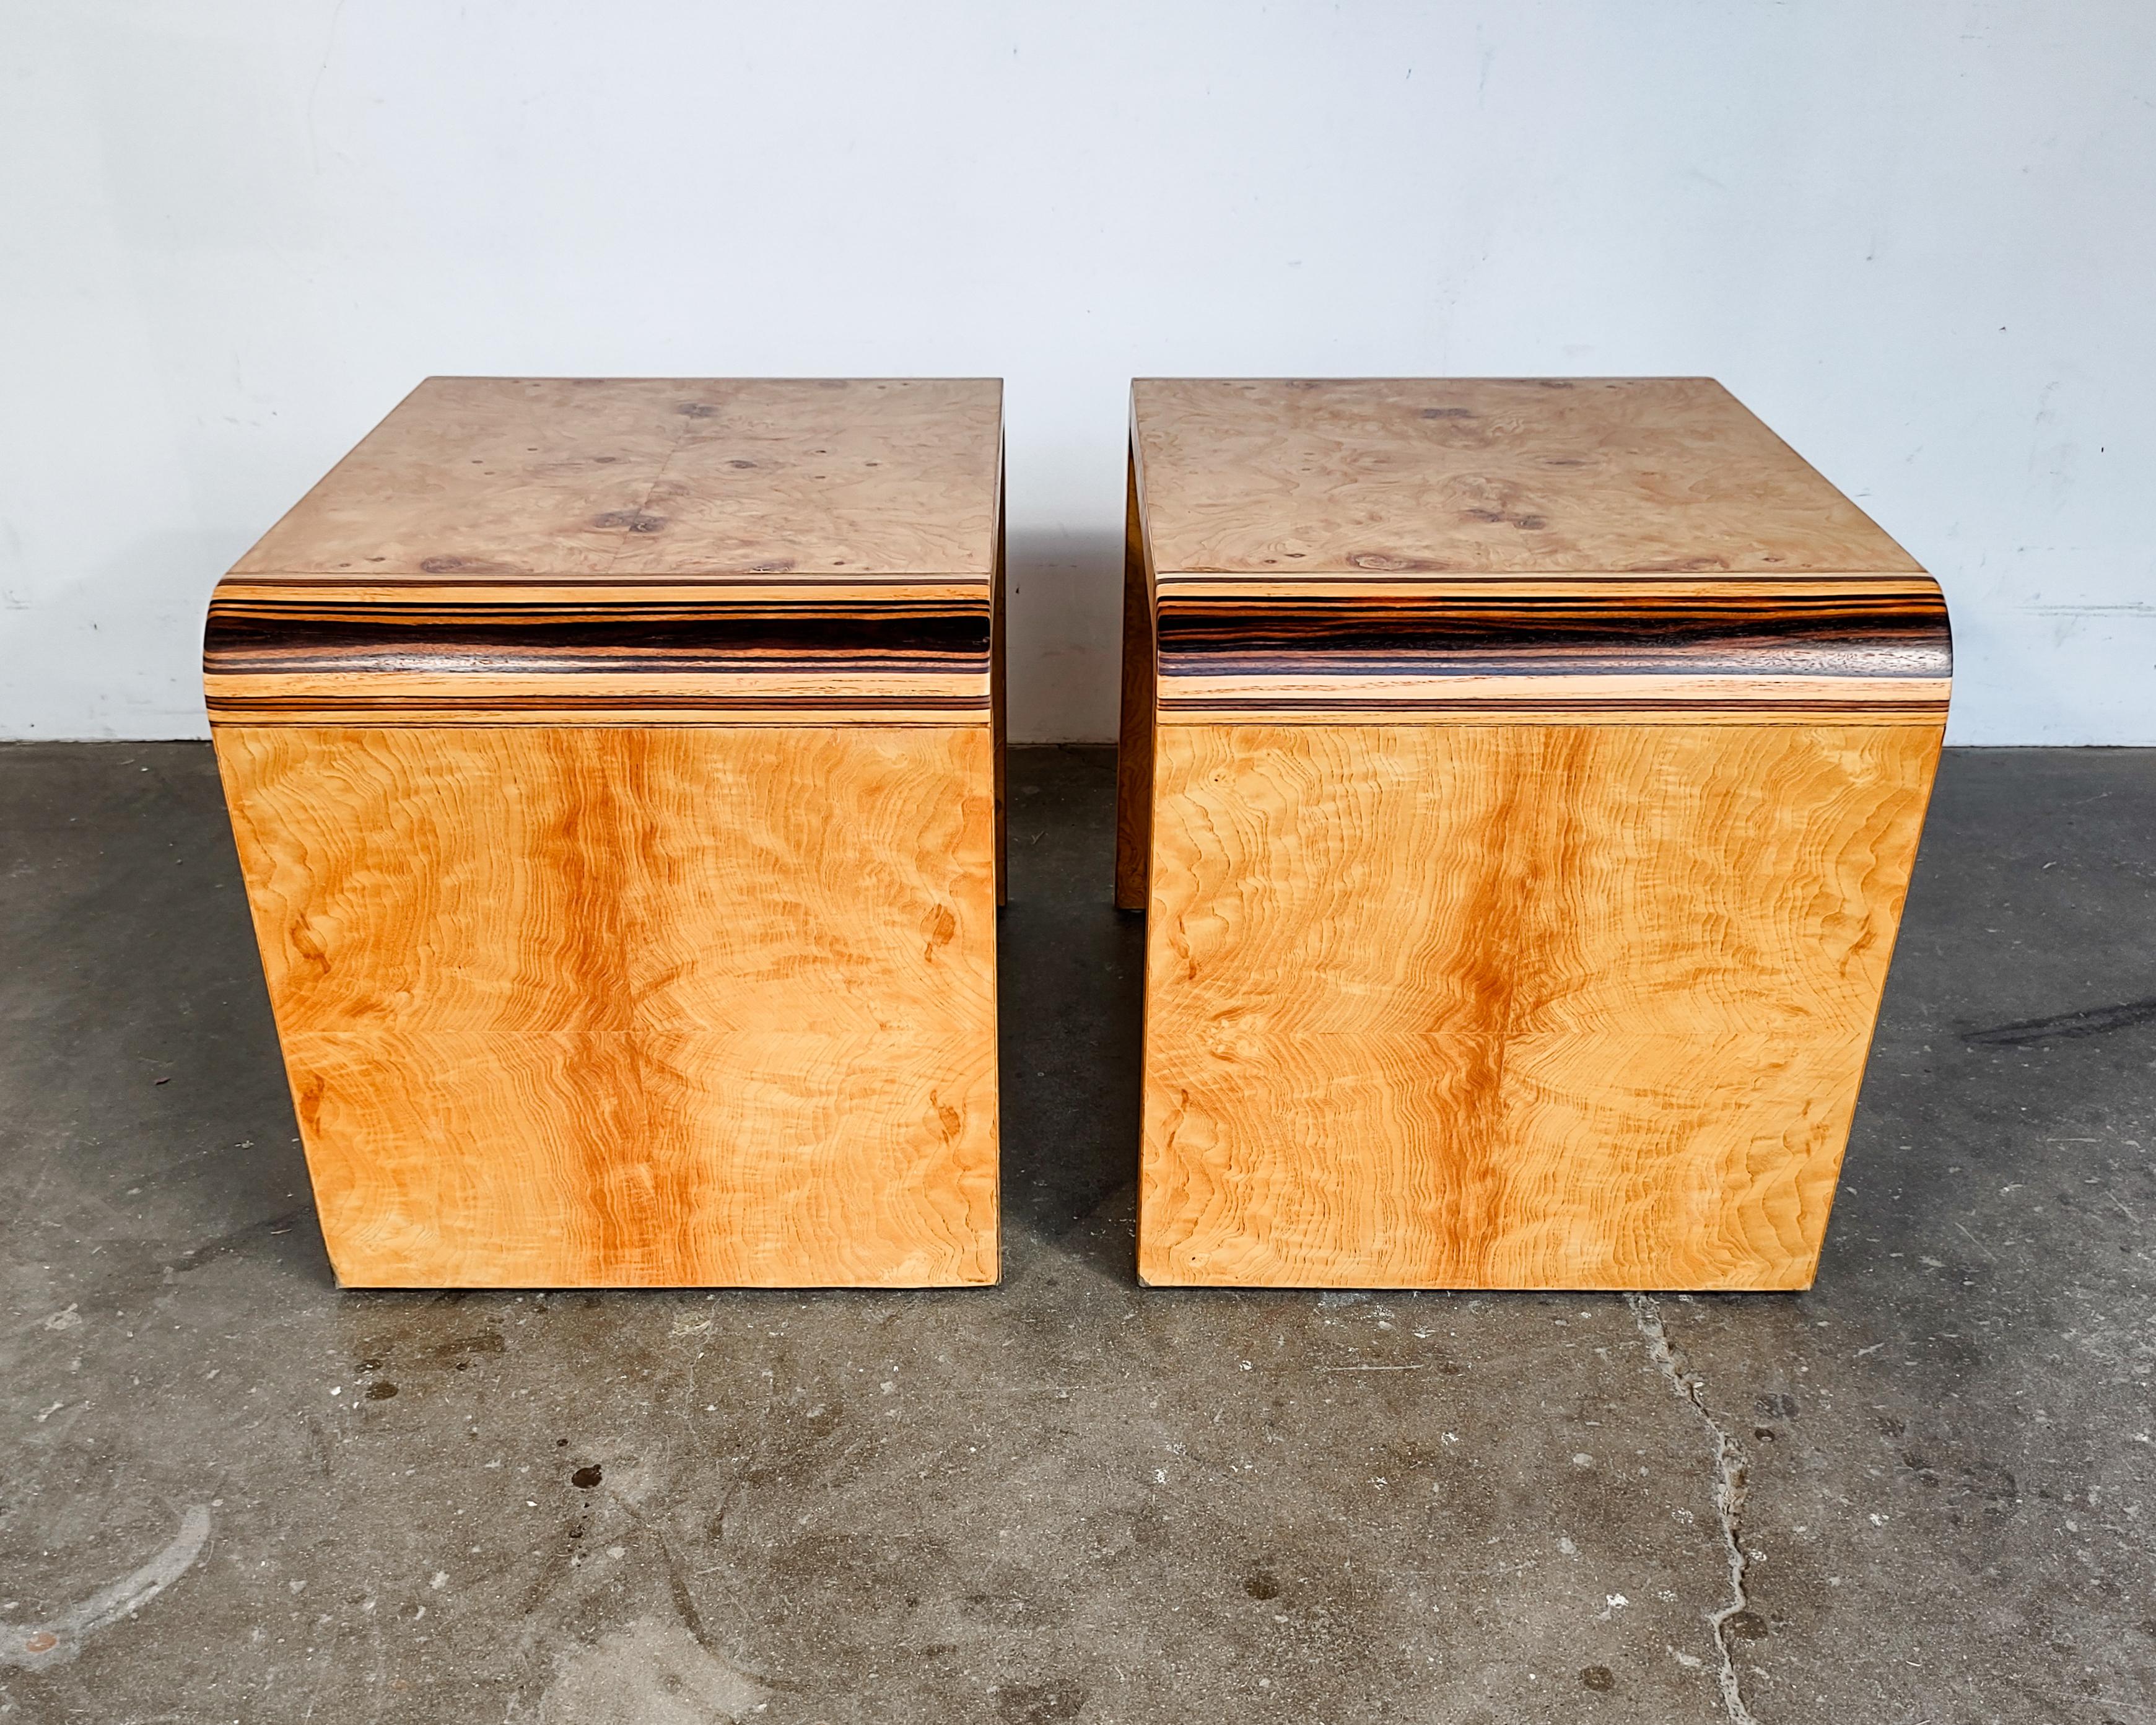 Pair of burl waterfall side tables by Henredon. Refinished to showcase gorgeous olive burl wood grain with rosewood laminated corners. 

Measures: 21.5